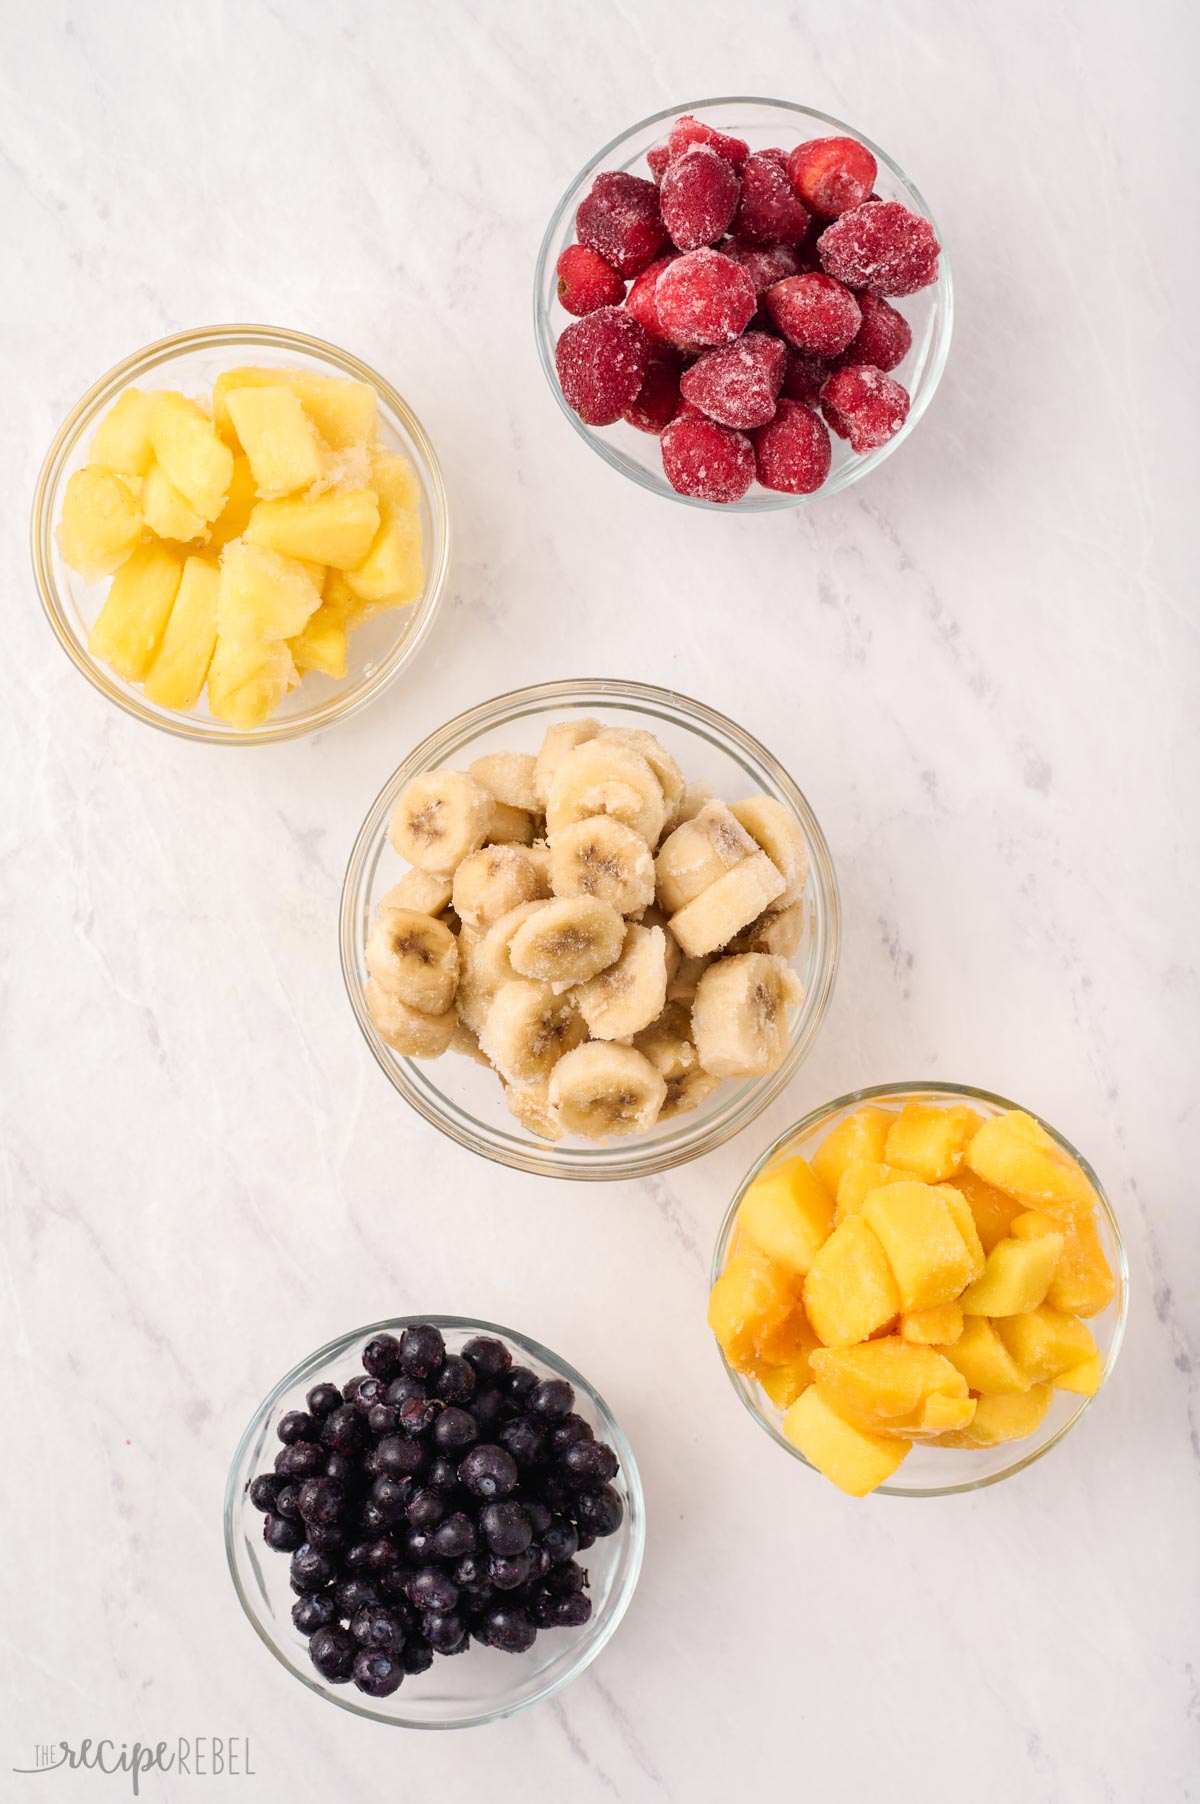 frozen fruit options for smoothies in glass bowls